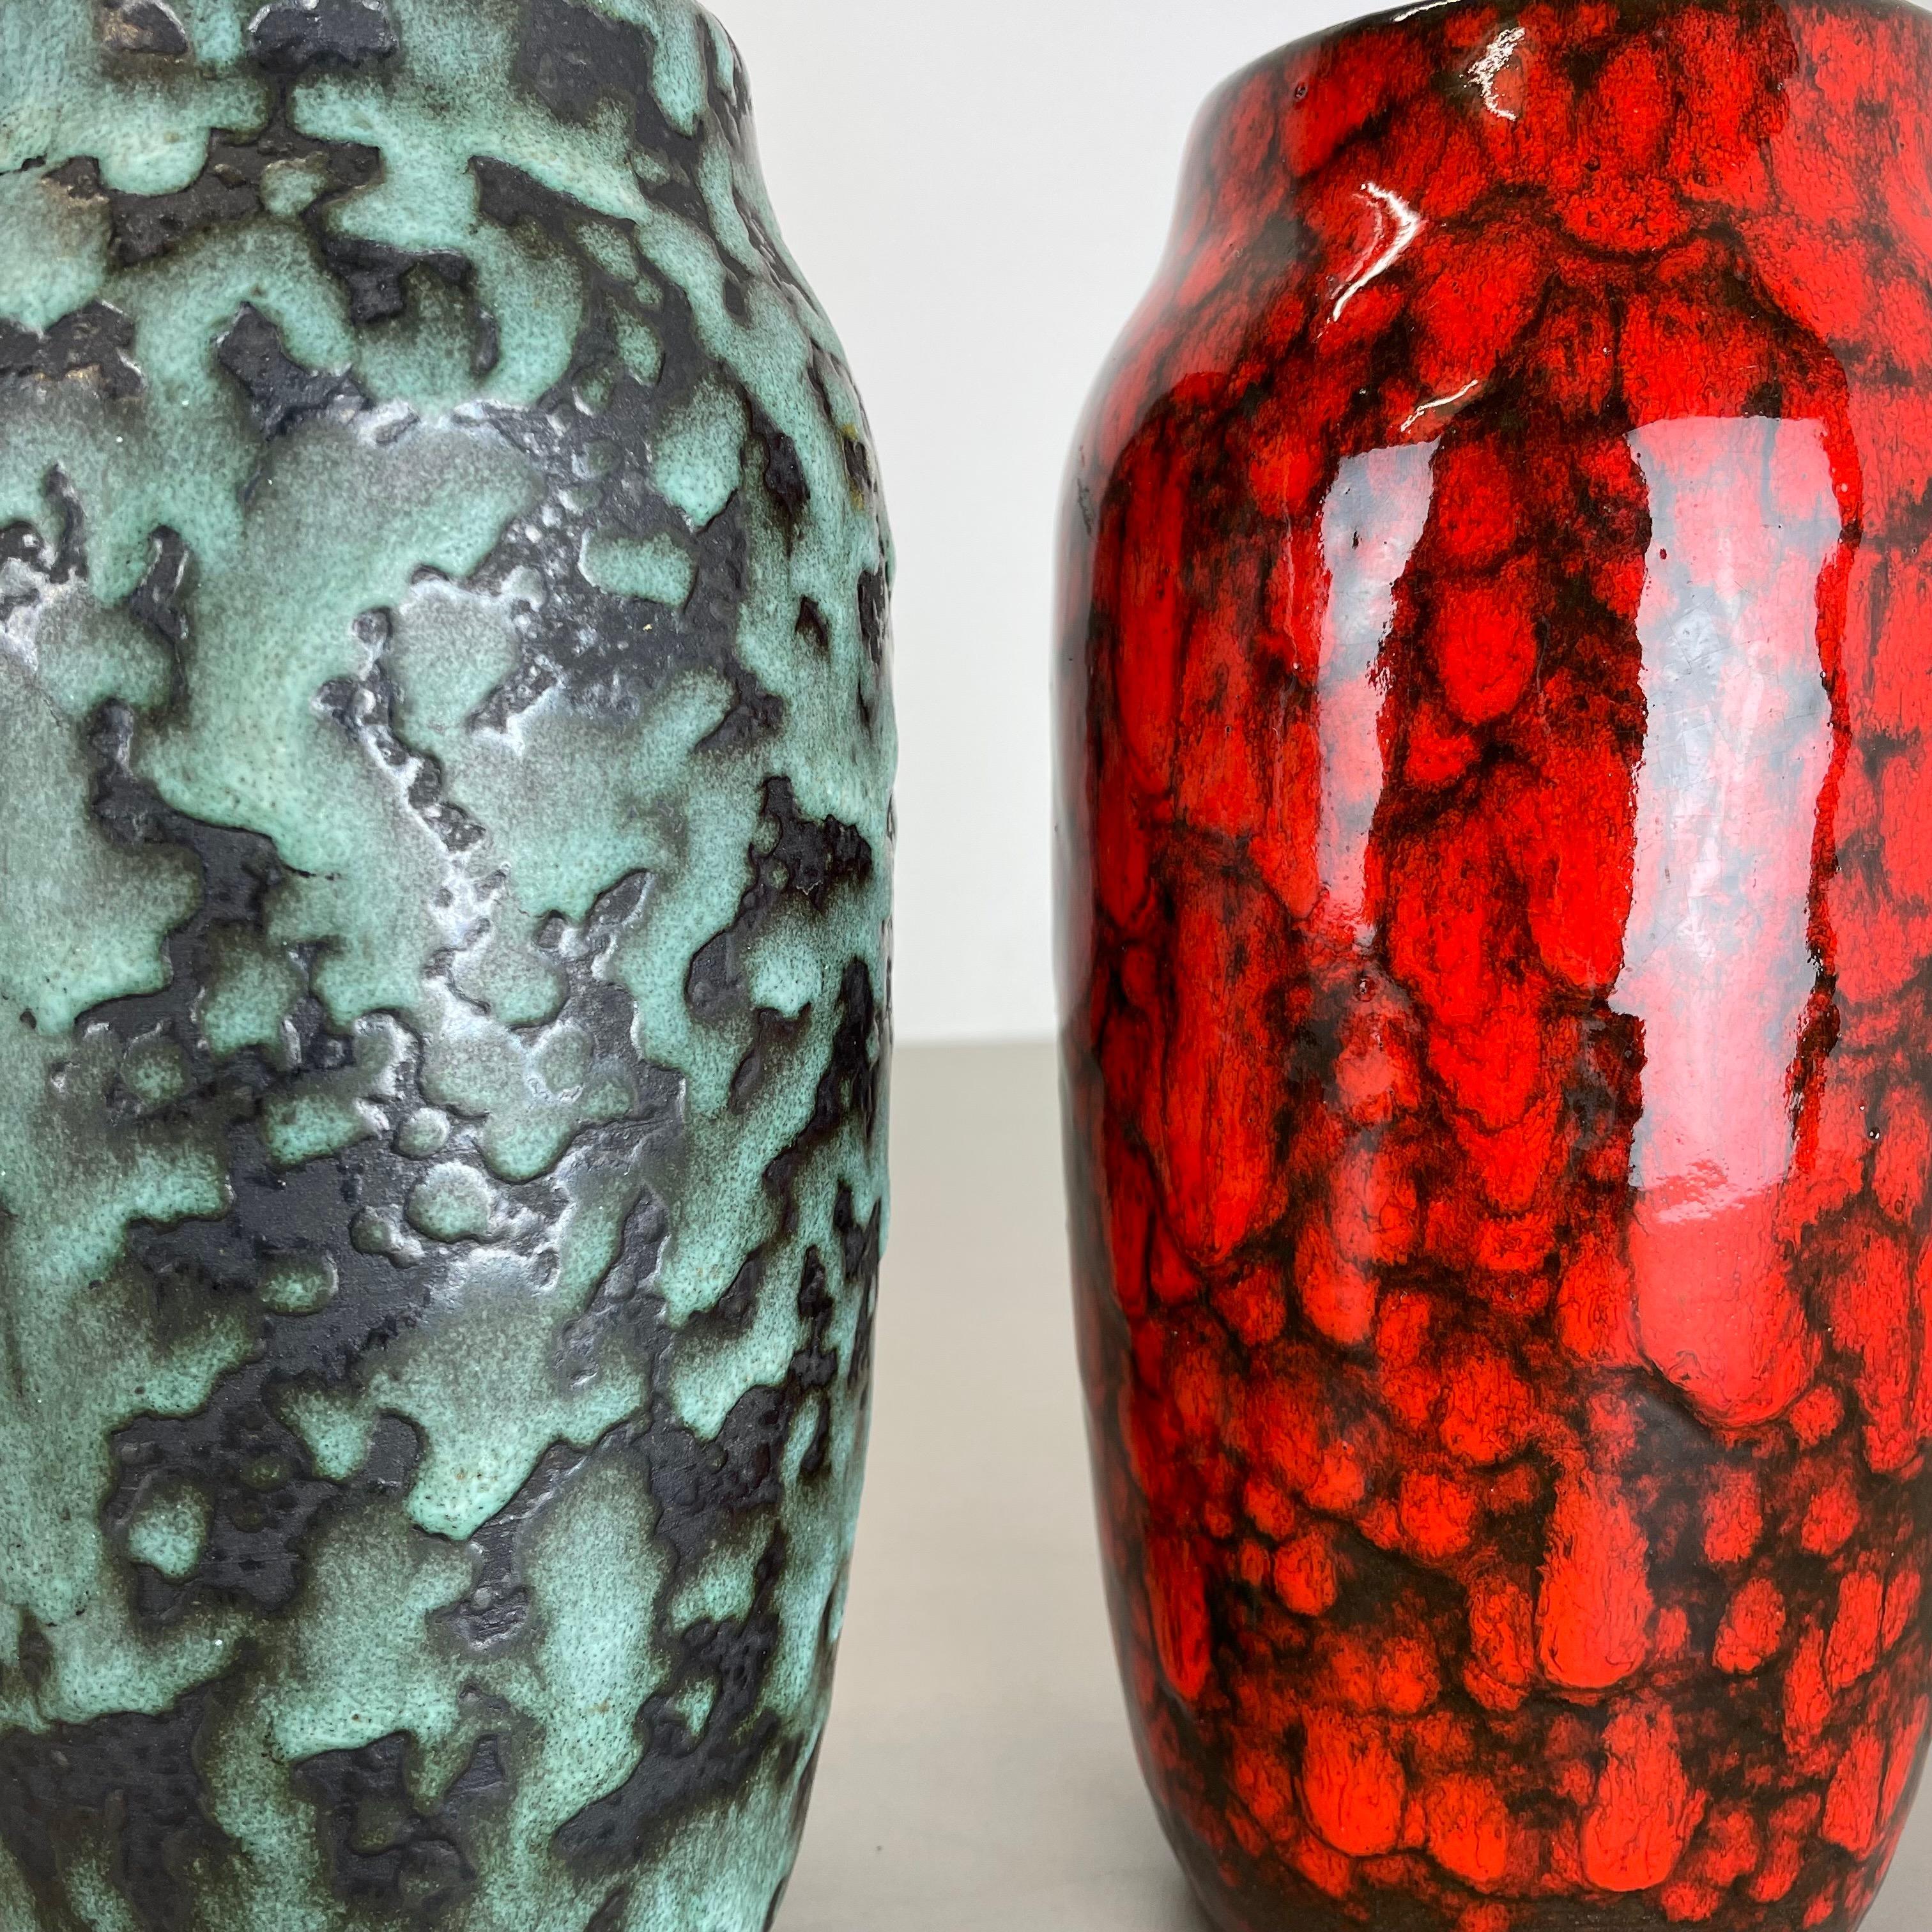 Set of 2 Rare Super Color Crusty Fat Lava Vases by Scheurich, Germany WGP, 1970s For Sale 10